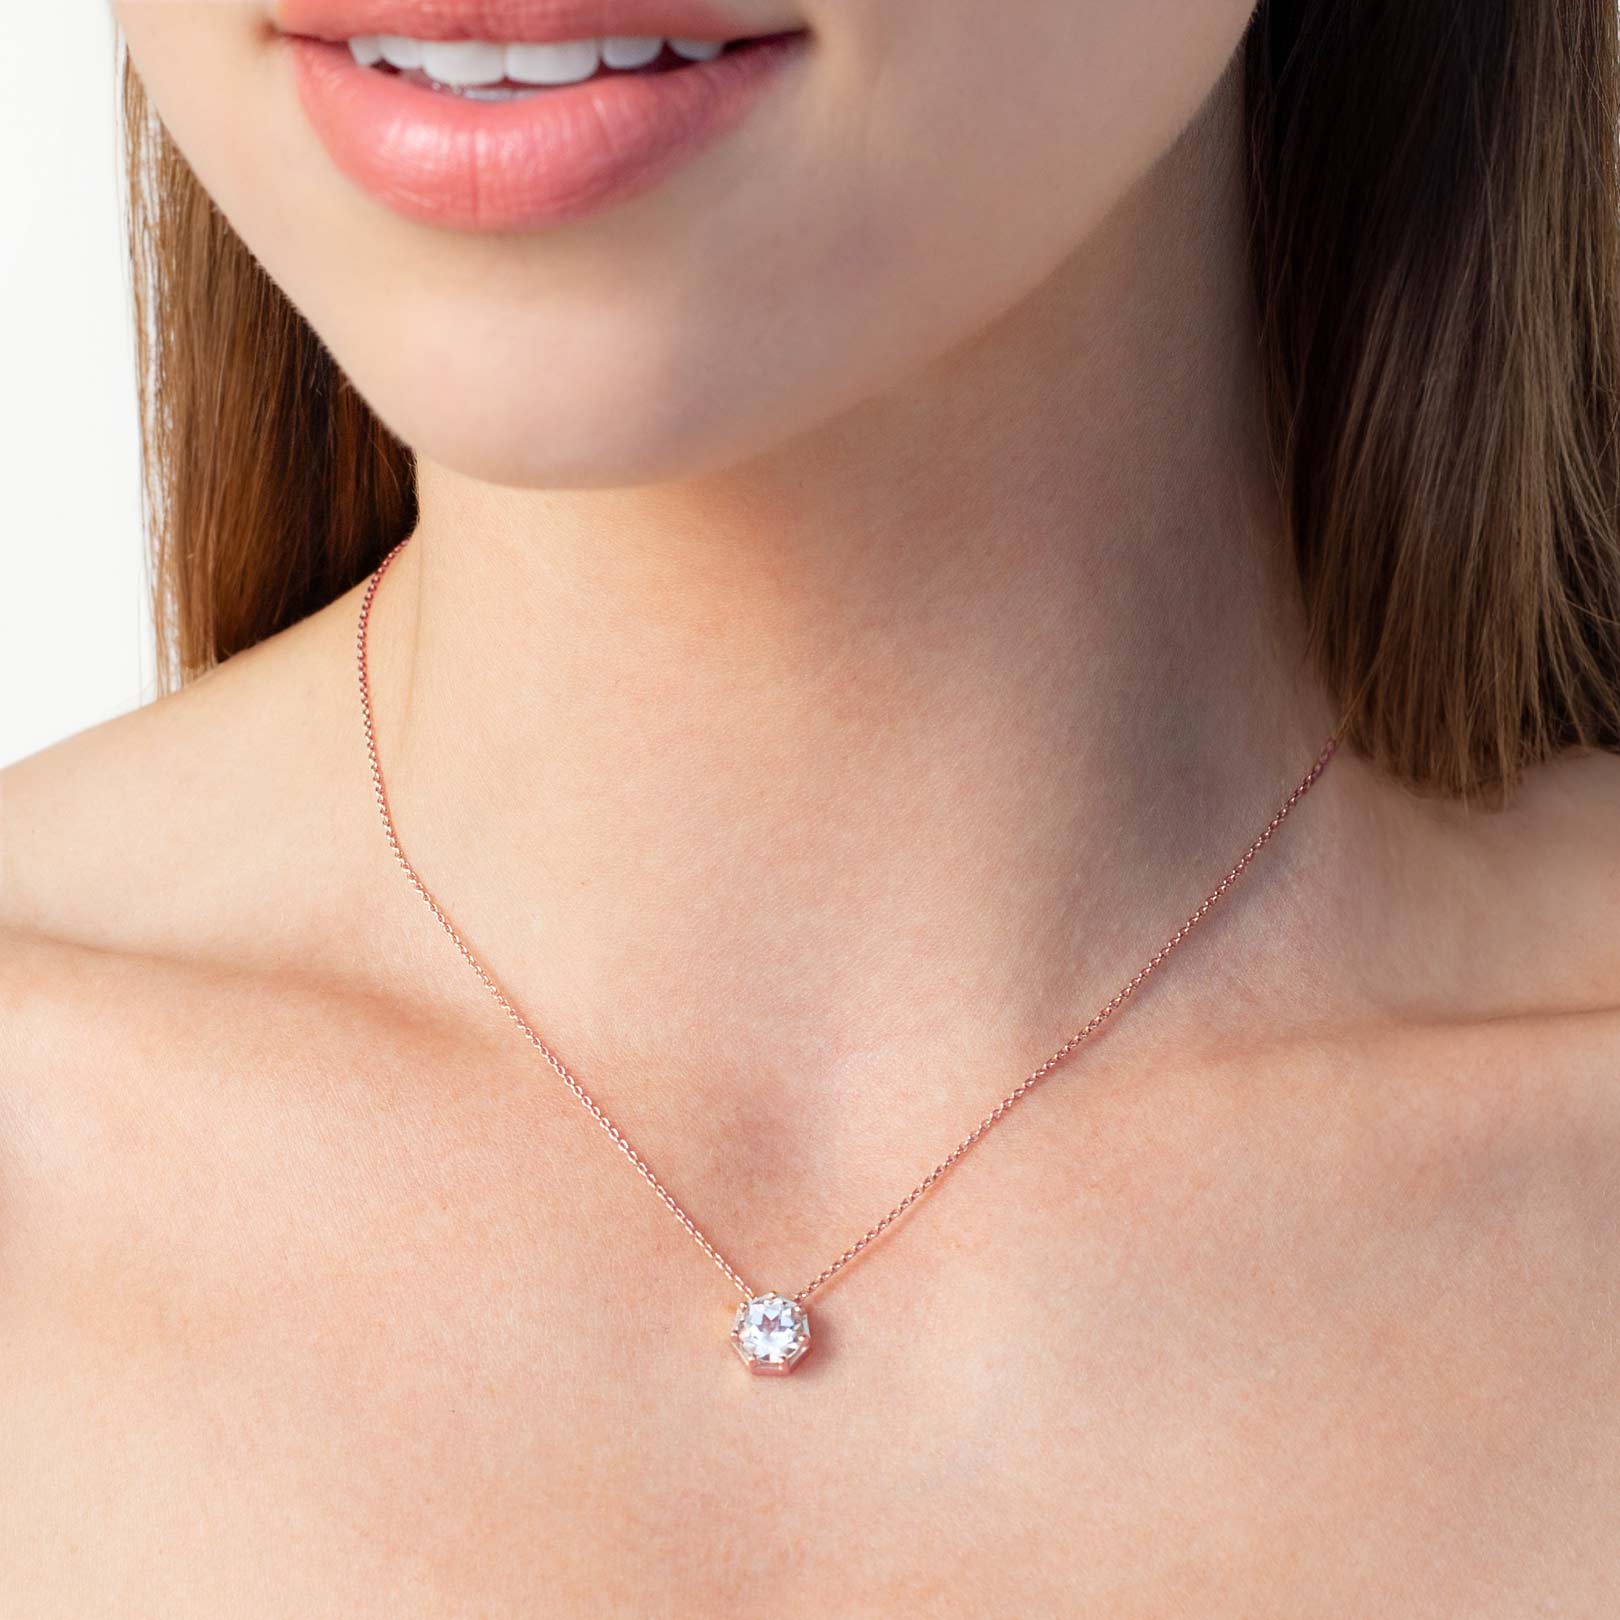 Close up of a christian woman wearing 18k rose gold vermeil white topaz Ebenezer Solitaire Necklace from the Chispa Collection by Rizen Jewelry.